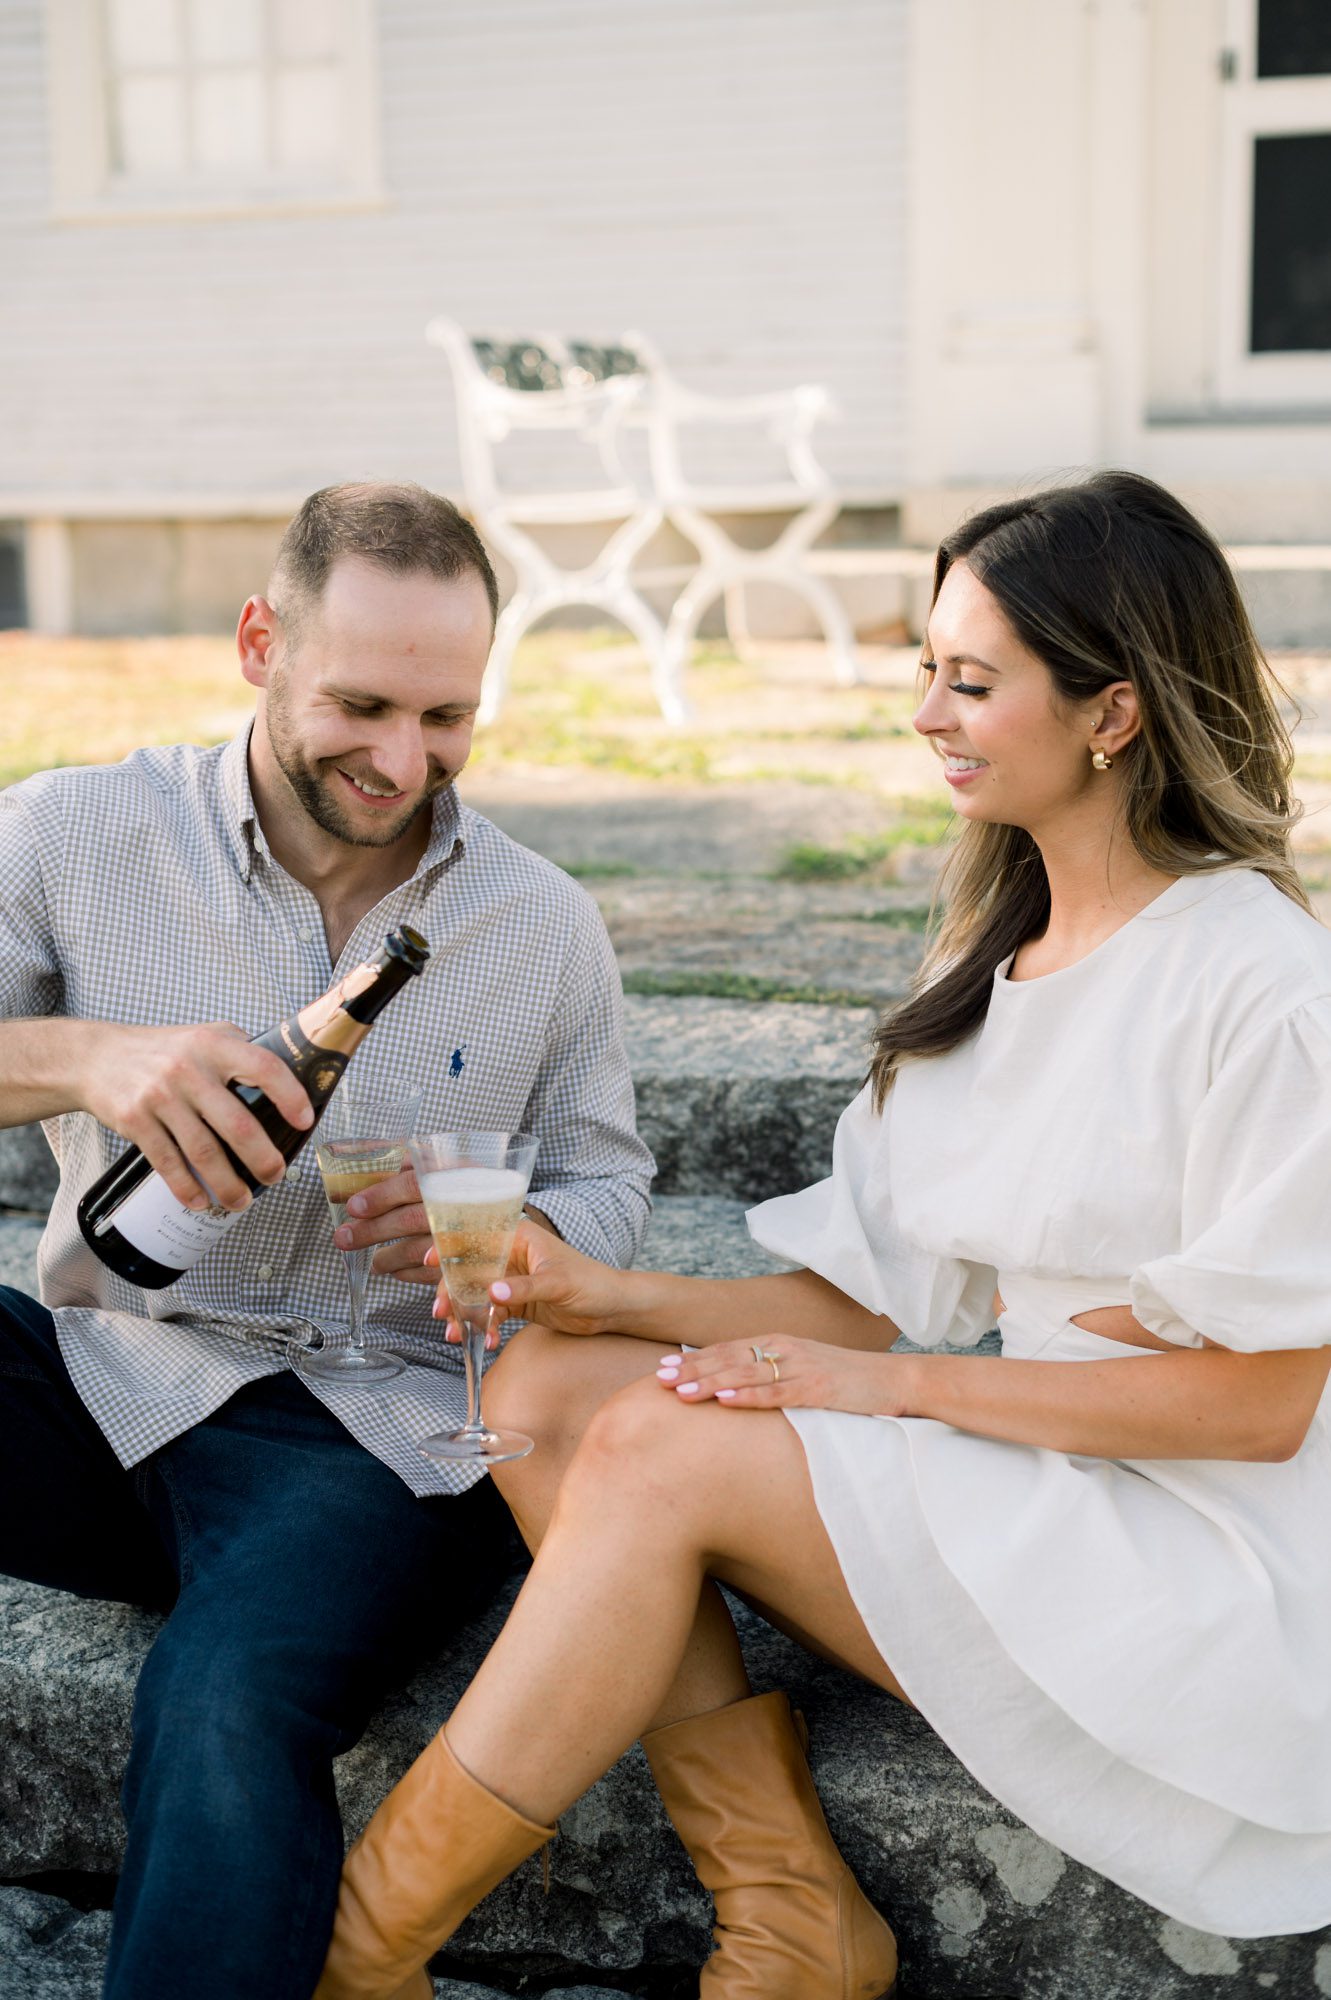 Couple having a champagne toast during their engagement photo session. Photographed by Maine wedding photographer Casey Durgin